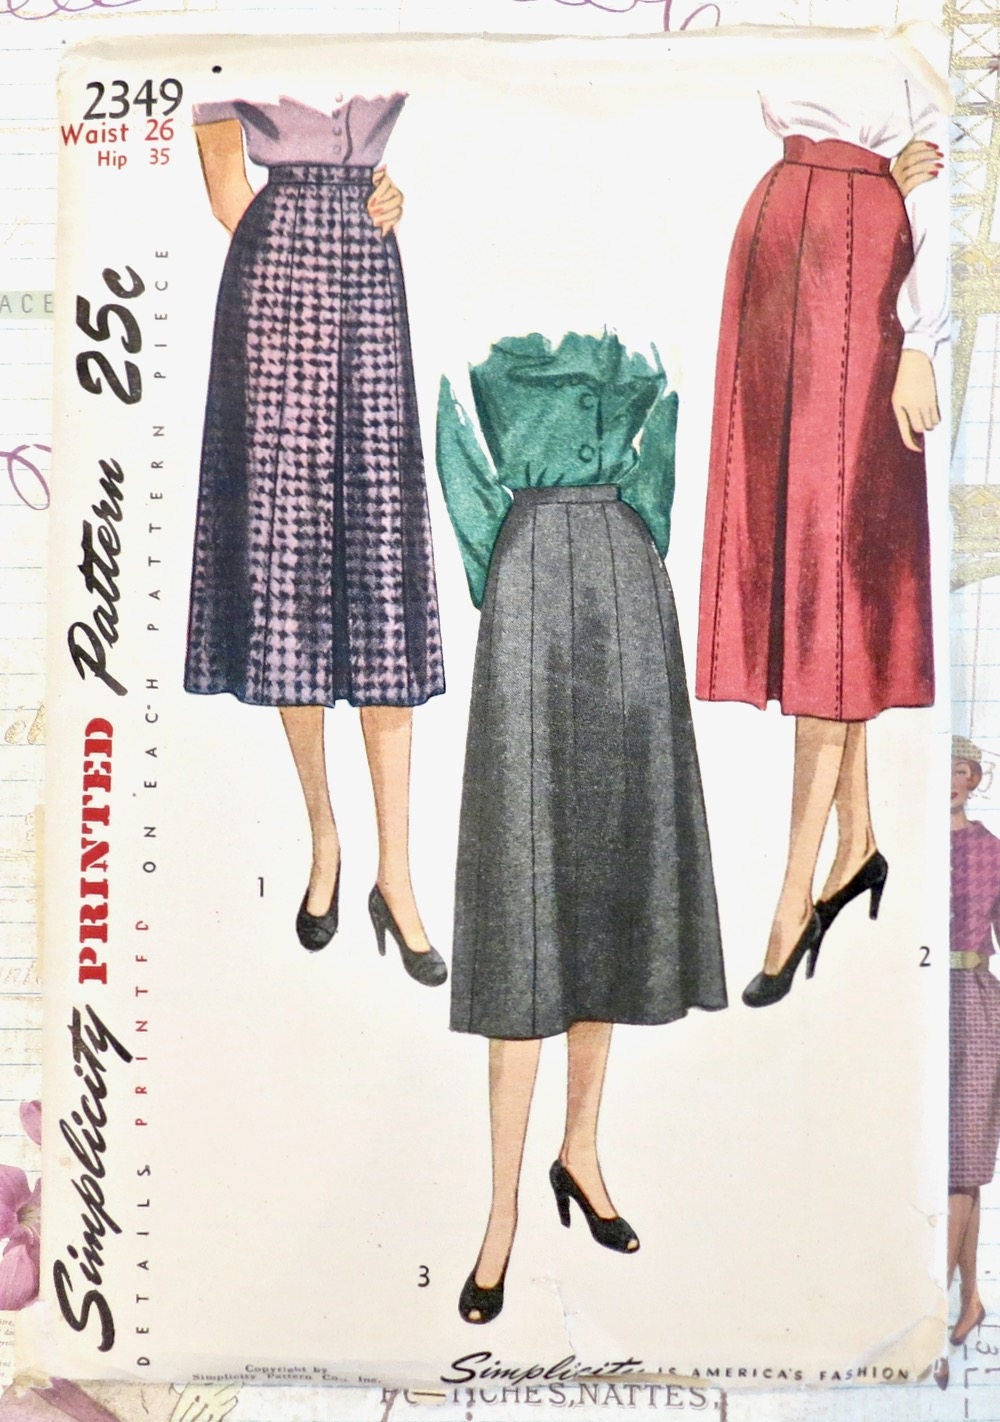 Vintage 1950s Womens Gored Skirt Pattern Simplicity 2349 | Etsy